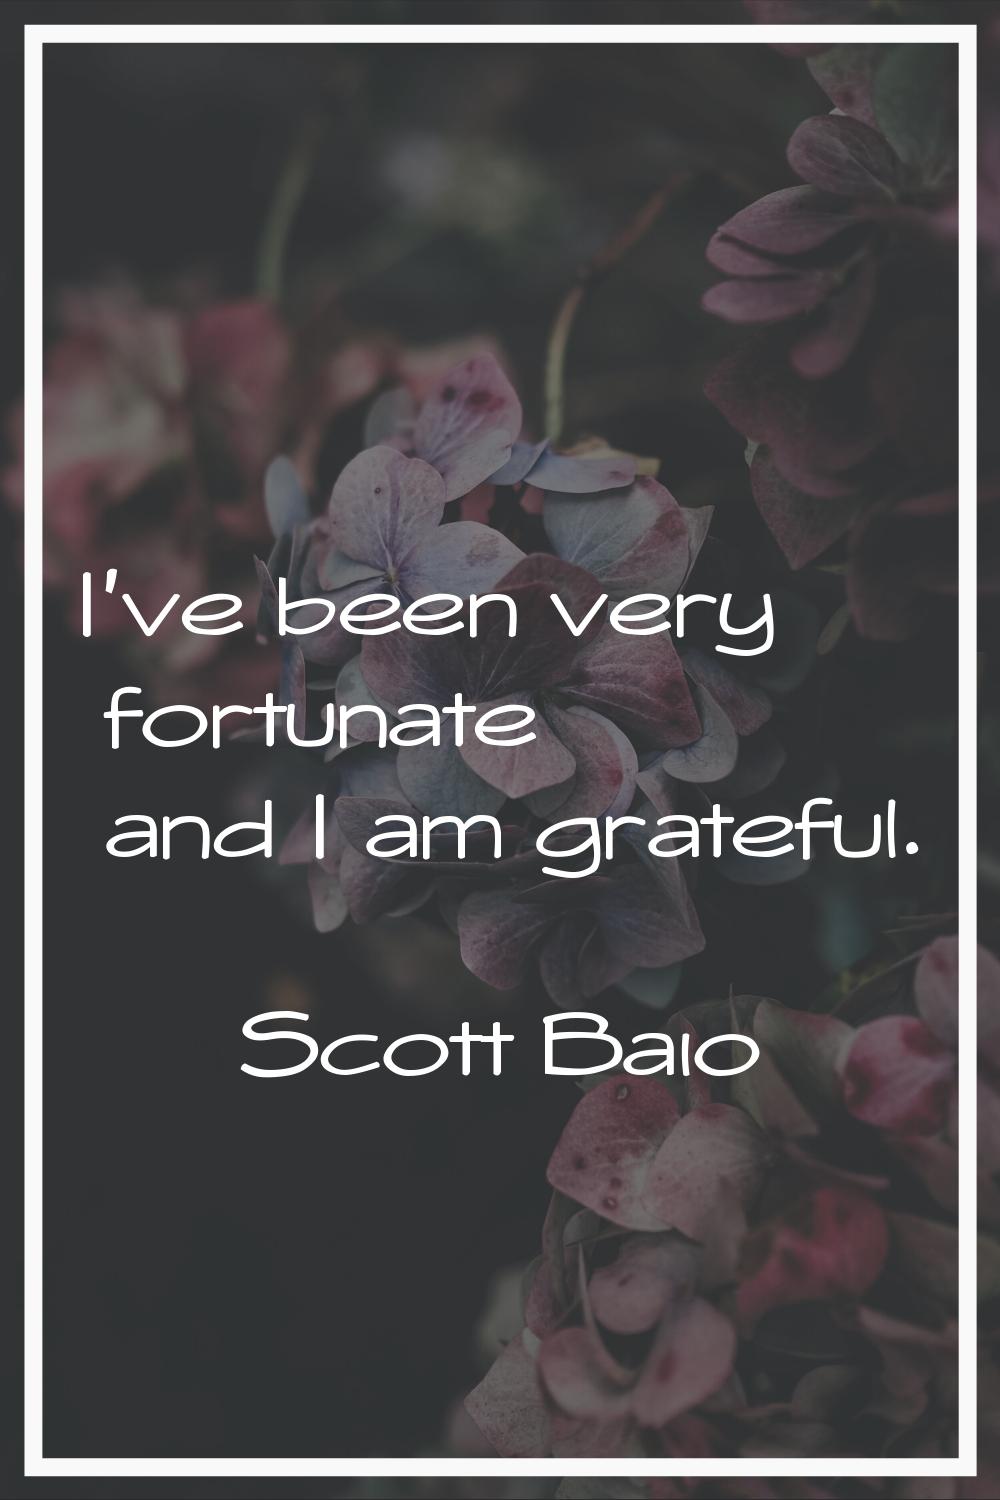 I've been very fortunate and I am grateful.